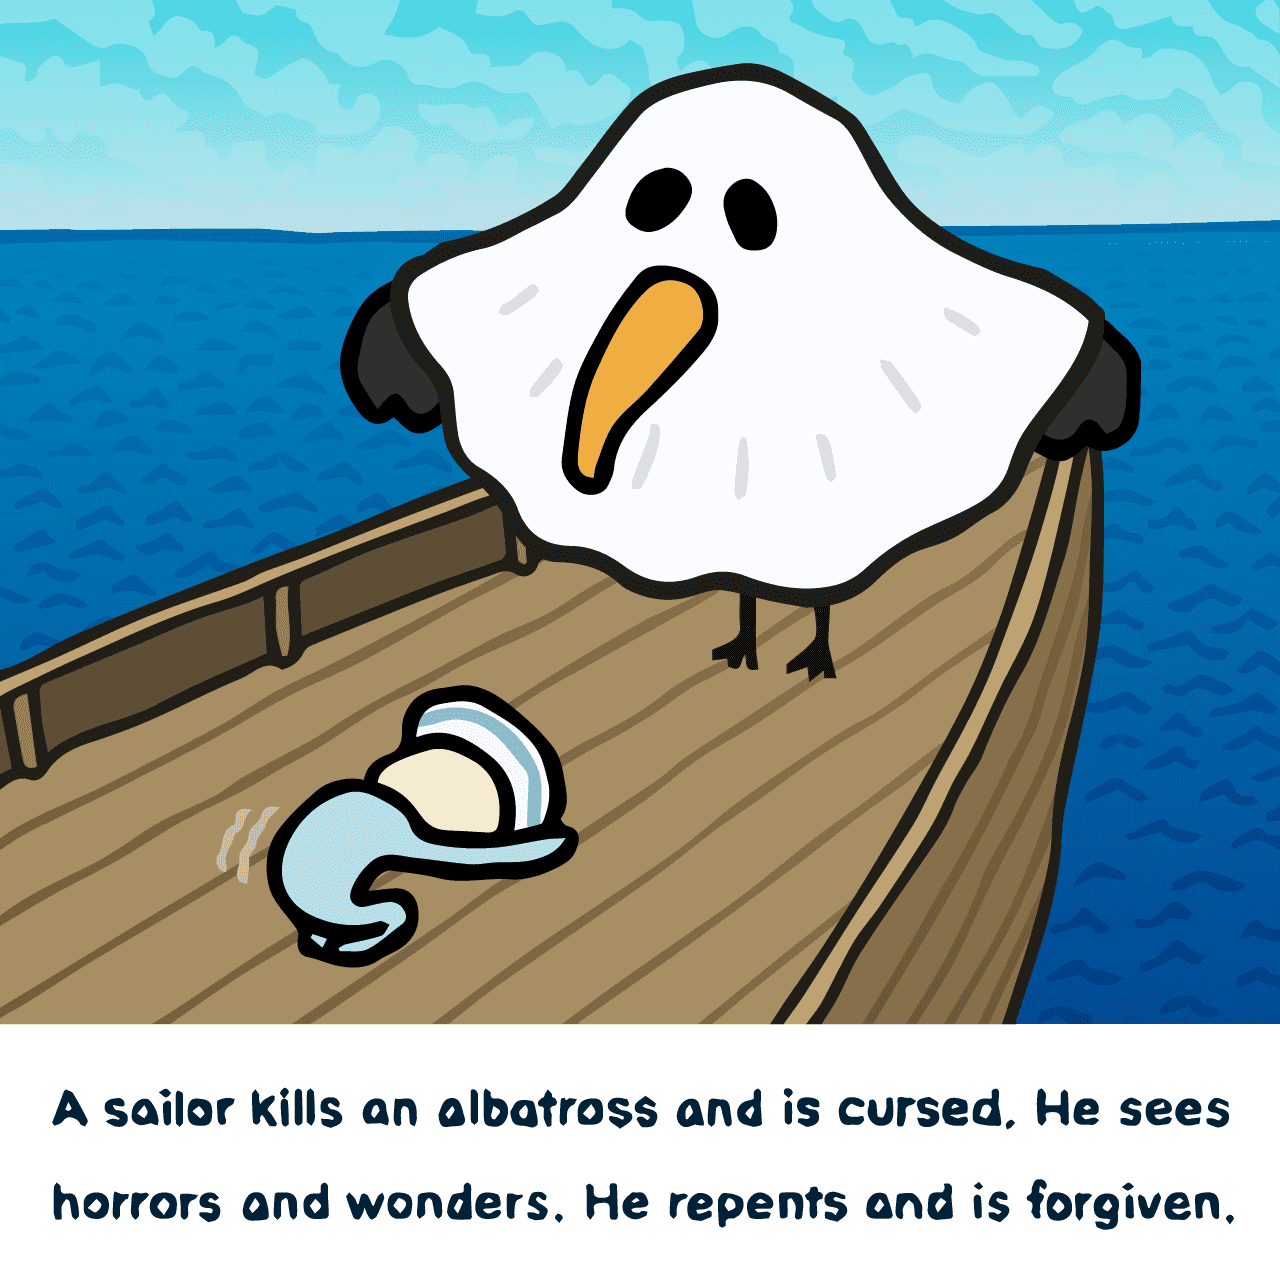 Samuel Taylor Coleridge "The Rime of the Ancient Mariner : A sailor kills an albatross and is cursed. He sees horrors and wonders. He repents and is forgiven."